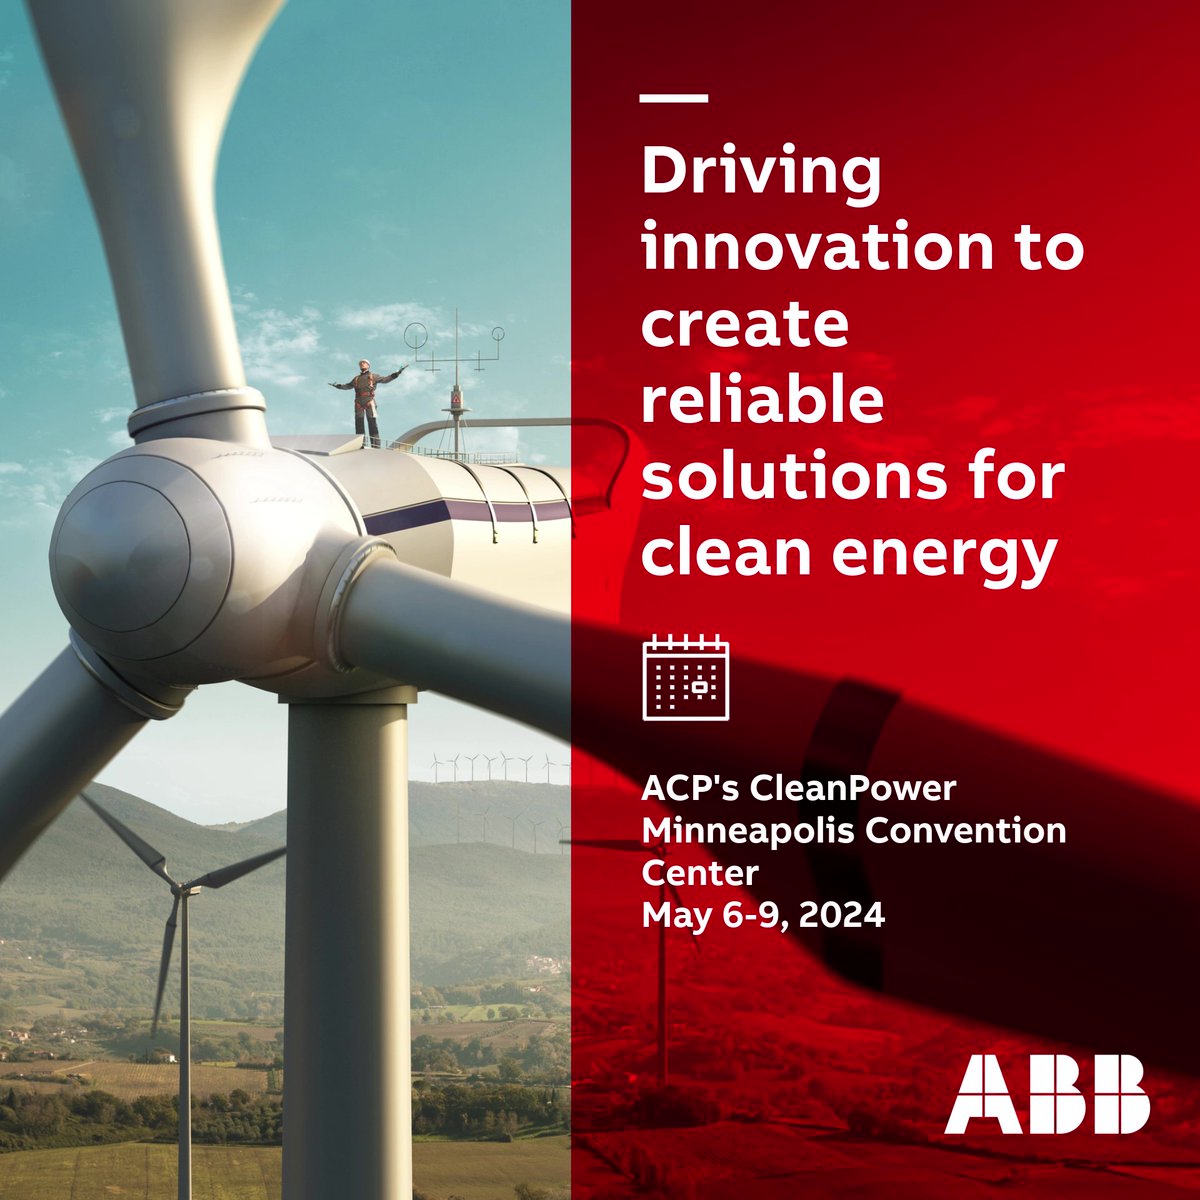 #ABB is driving innovation in renewable energy, providing efficient and reliable solutions to power communities worldwide. Join us at @USCleanPower's Conference as we shape a more sustainable world for cleaner energy and a brighter tomorrow! 🌍 ➡️ ecs.page.link/MoCY1